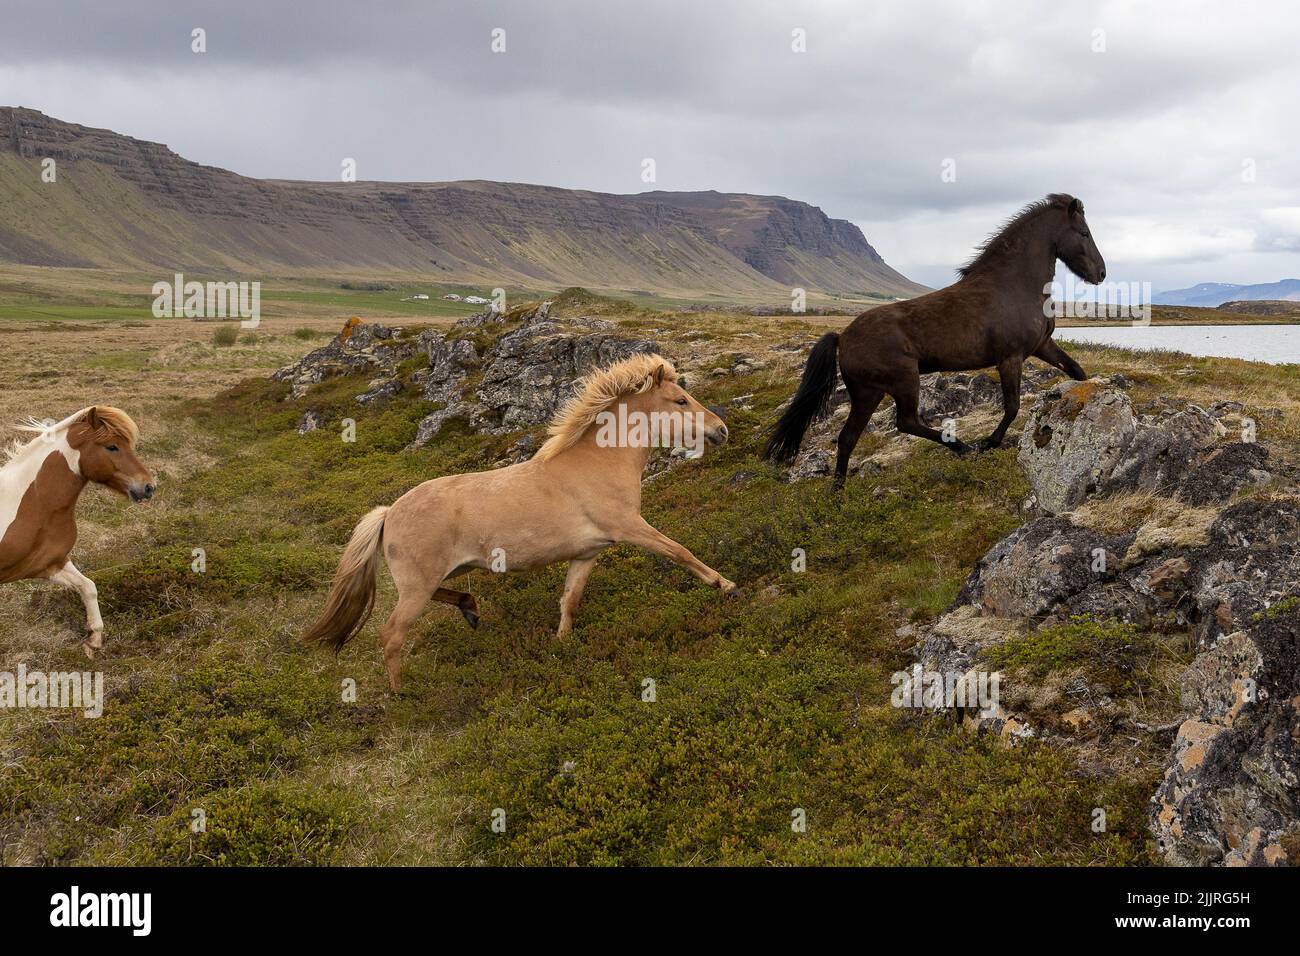 The horses running in the rocky green field against the background of hills. Iceland. Stock Photo